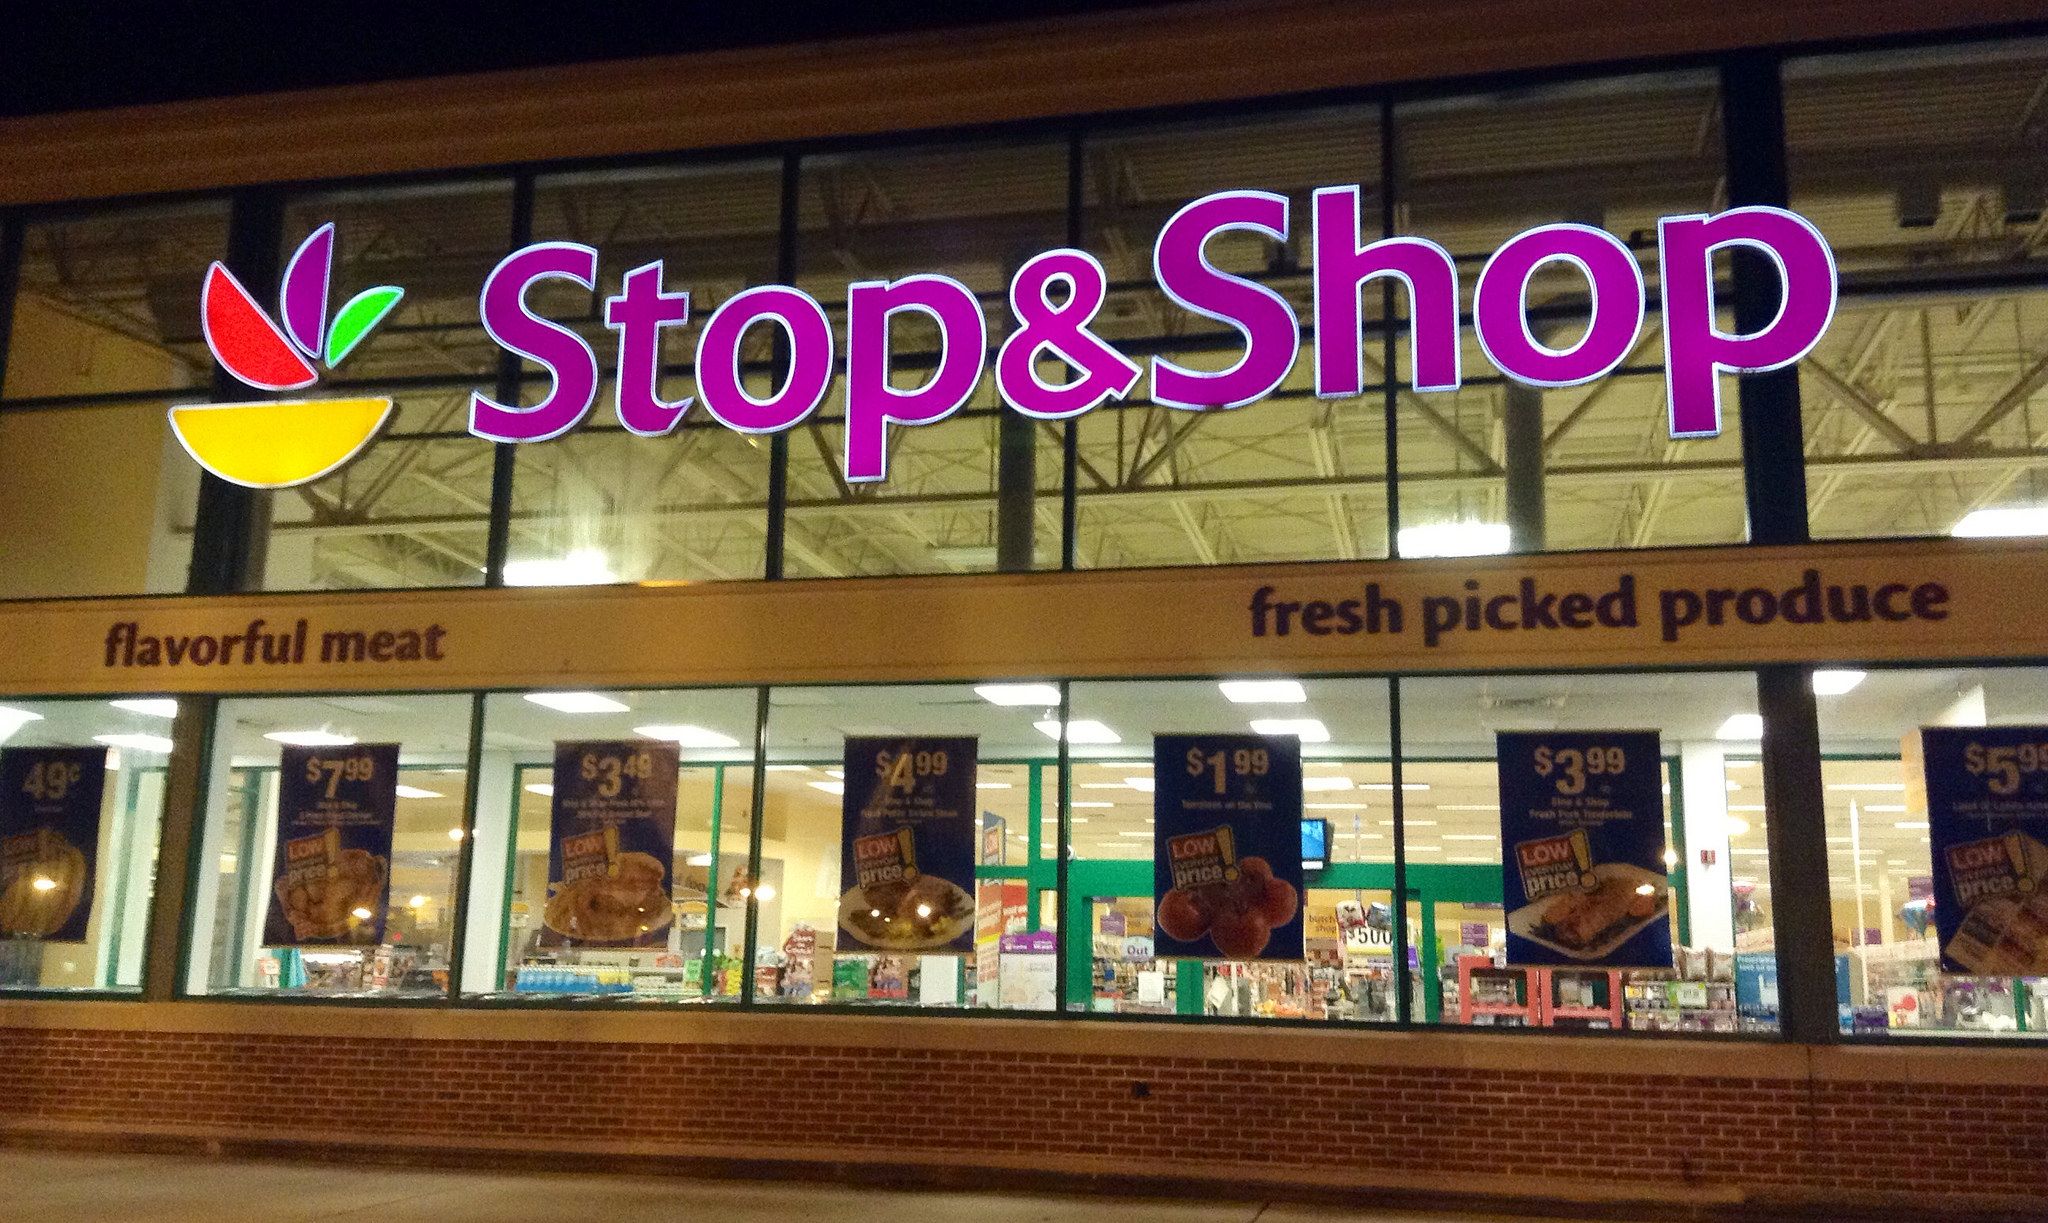 Facing High Prices, Stop & Shop Ponders Store Closures, 10% of Its Stores Across the Northeastern US To Be Shuttered